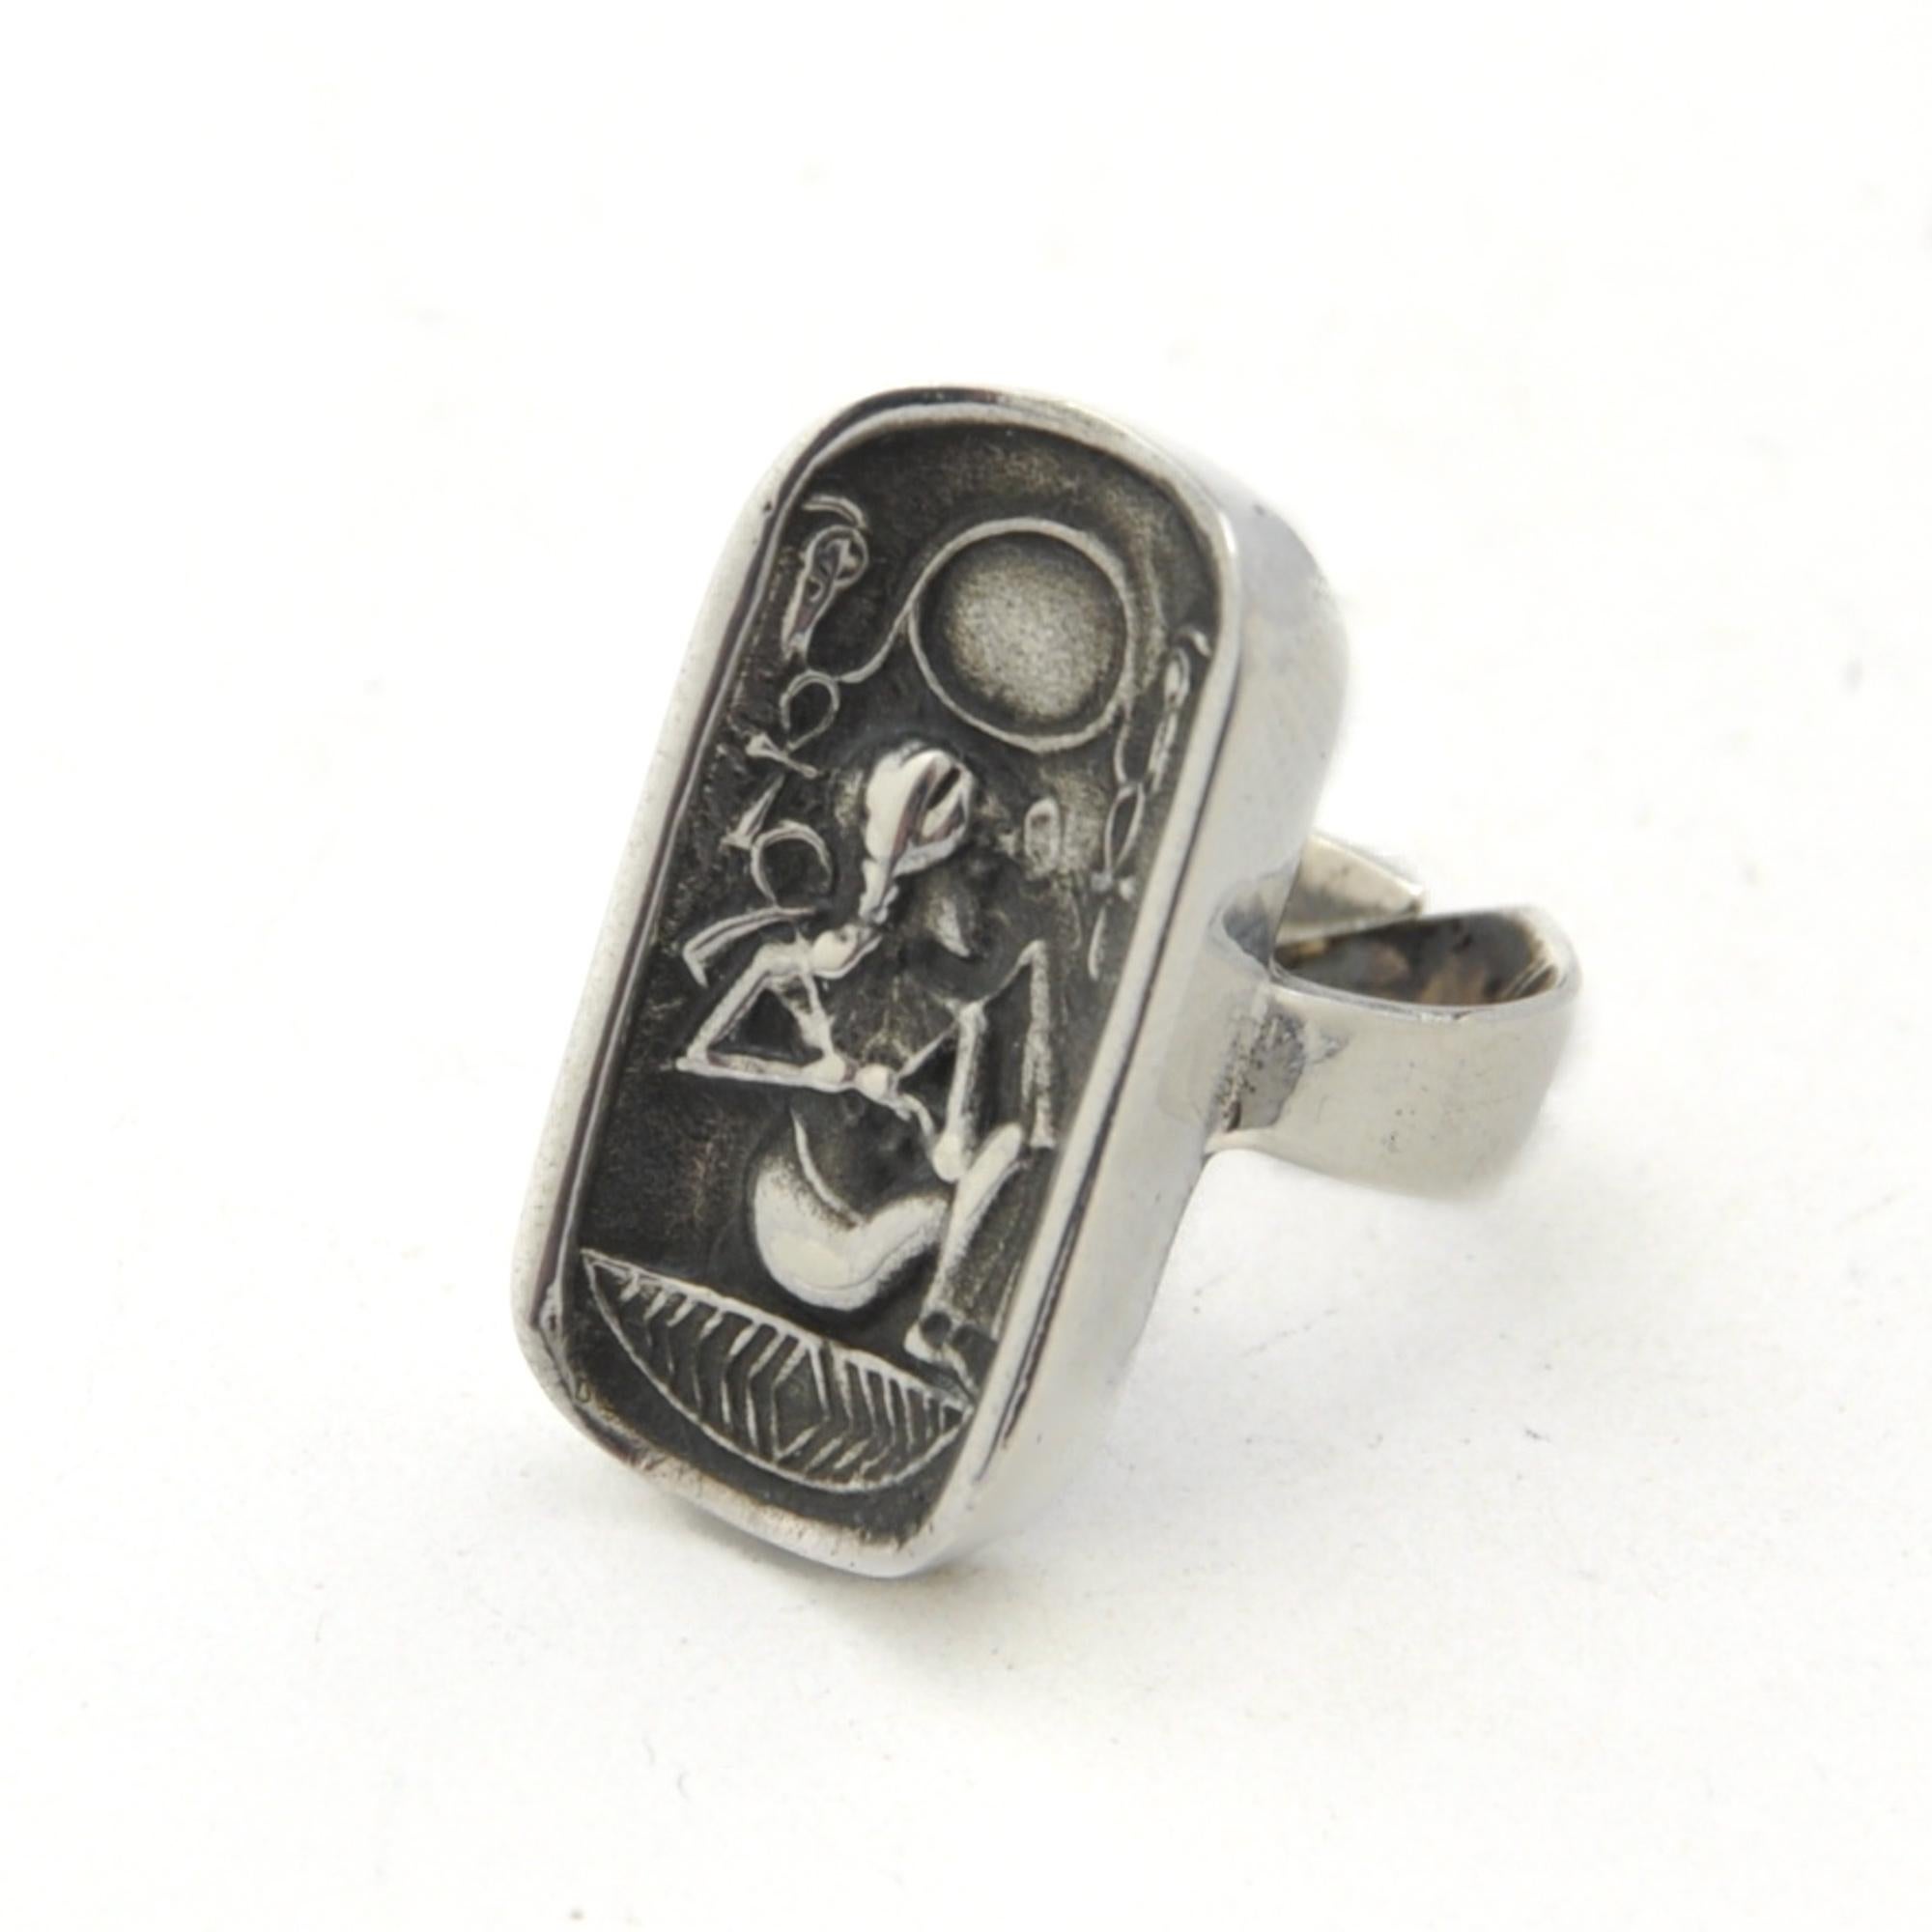 A beautiful Egyptian Revival cartouche ring depicting a sitting pharaoh with Egyptian symbols. The pharaoh is holding a crook and flail in his hands, these were symbols of the pharaoh, the ruling monarch in Ancient Egypt. The crook and flail